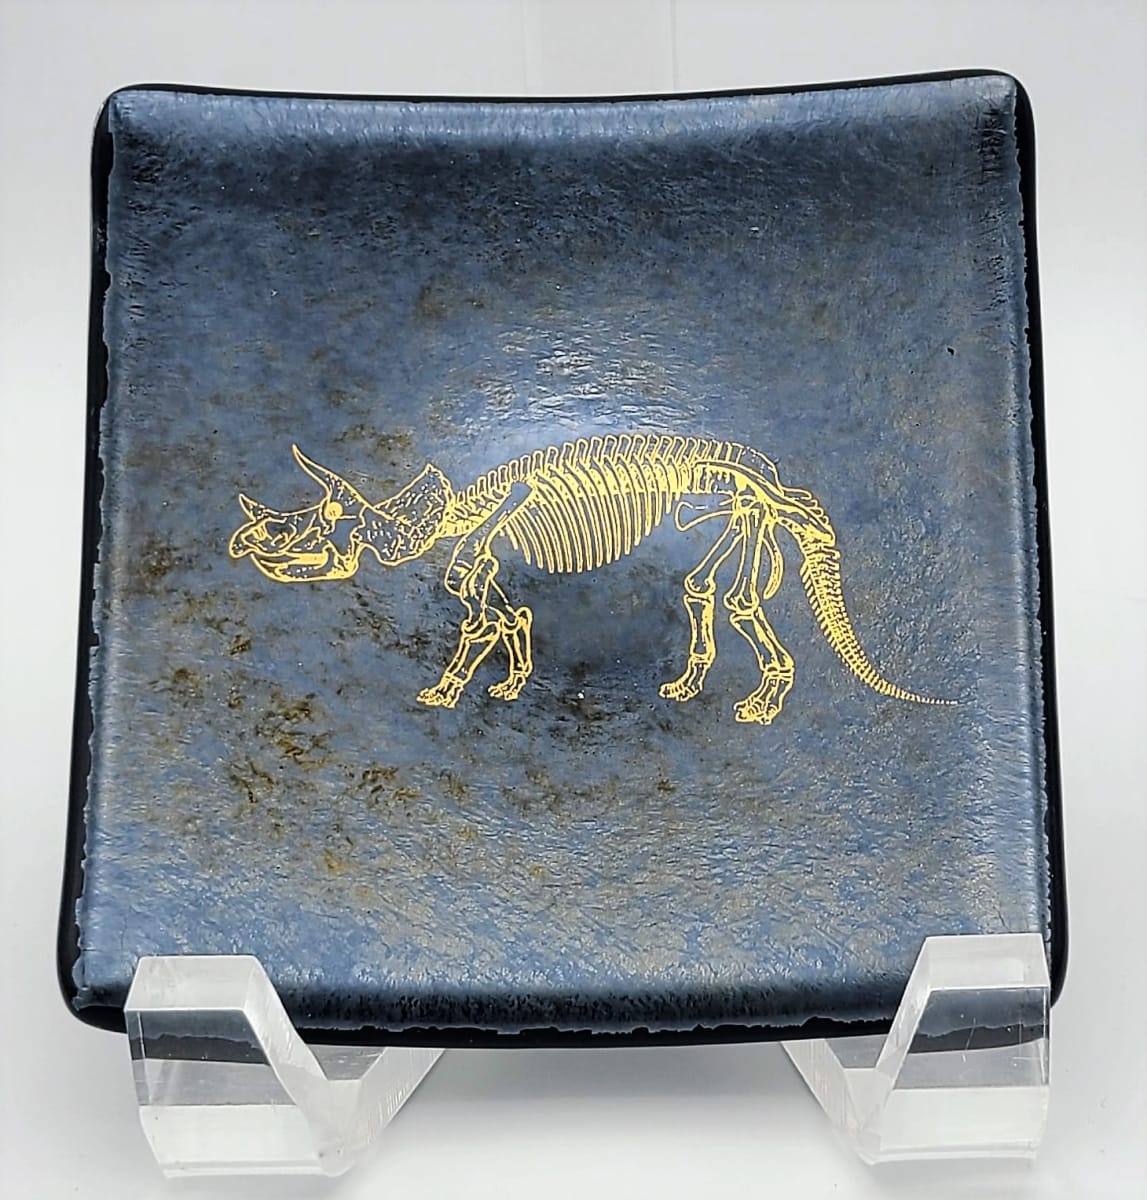 Small Plate-Gold Triceratops Skeleton on Silver Irid by Kathy Kollenburn 